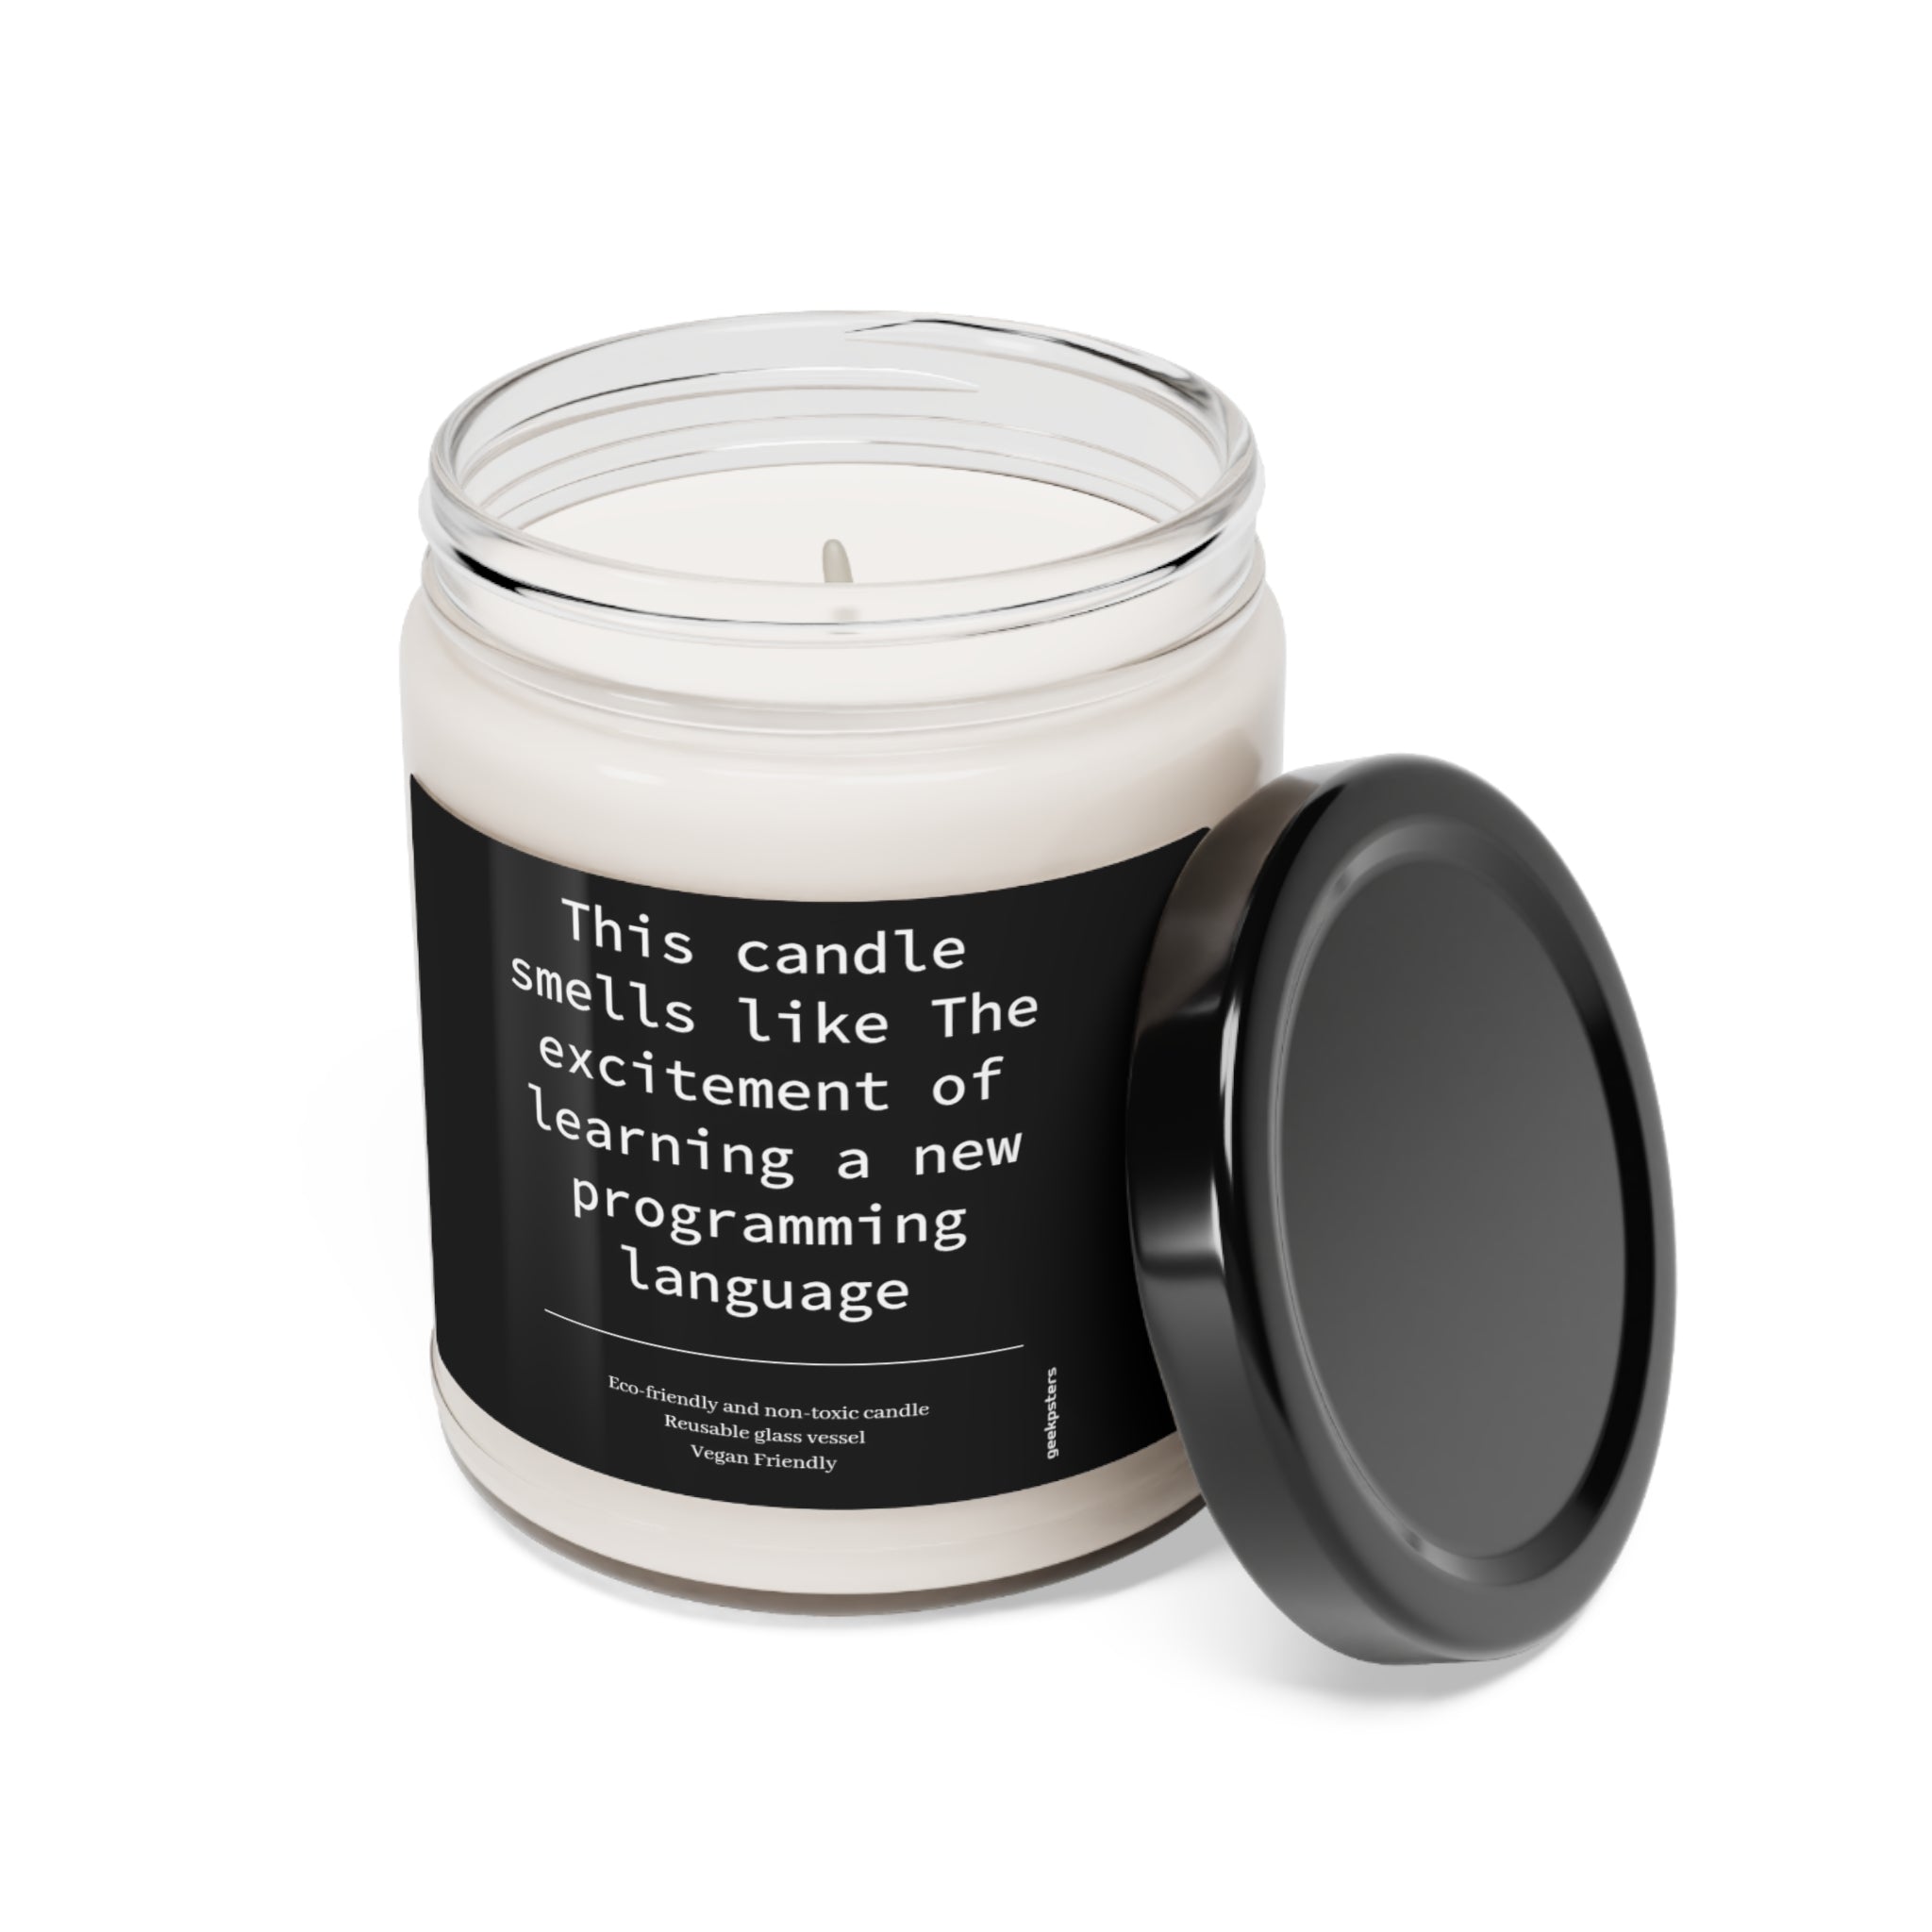 This Candle Smells Like The Excitement of Learning a New Programming Language - Scented Soy Candle, 9oz with a black label that reads "this candle smells like the excitement of learning a new programming language," and includes a black lid, on a white background.